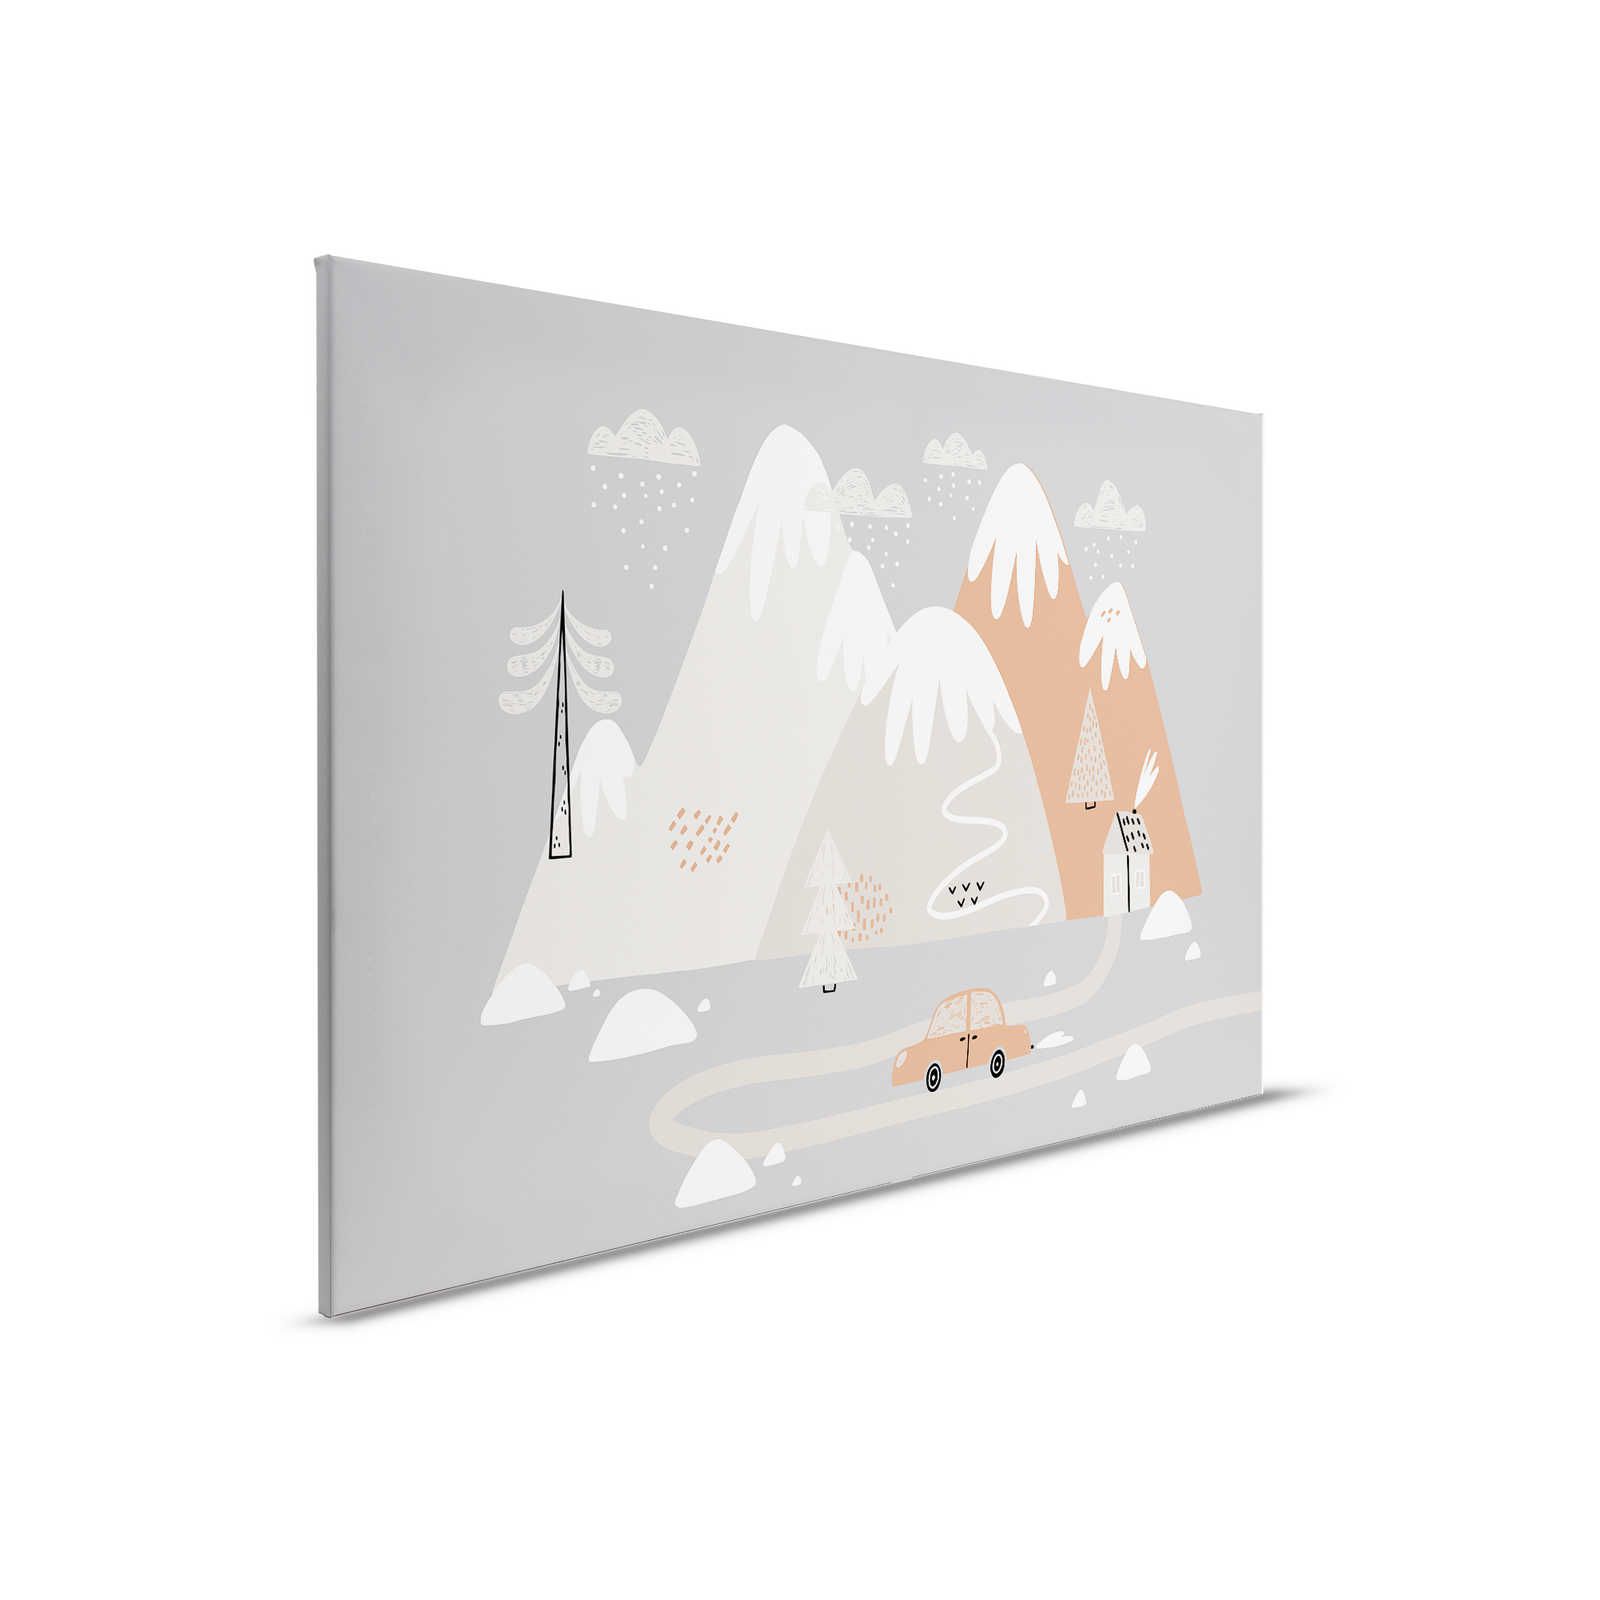 Canvas snowy hills with small house - 90 cm x 60 cm
